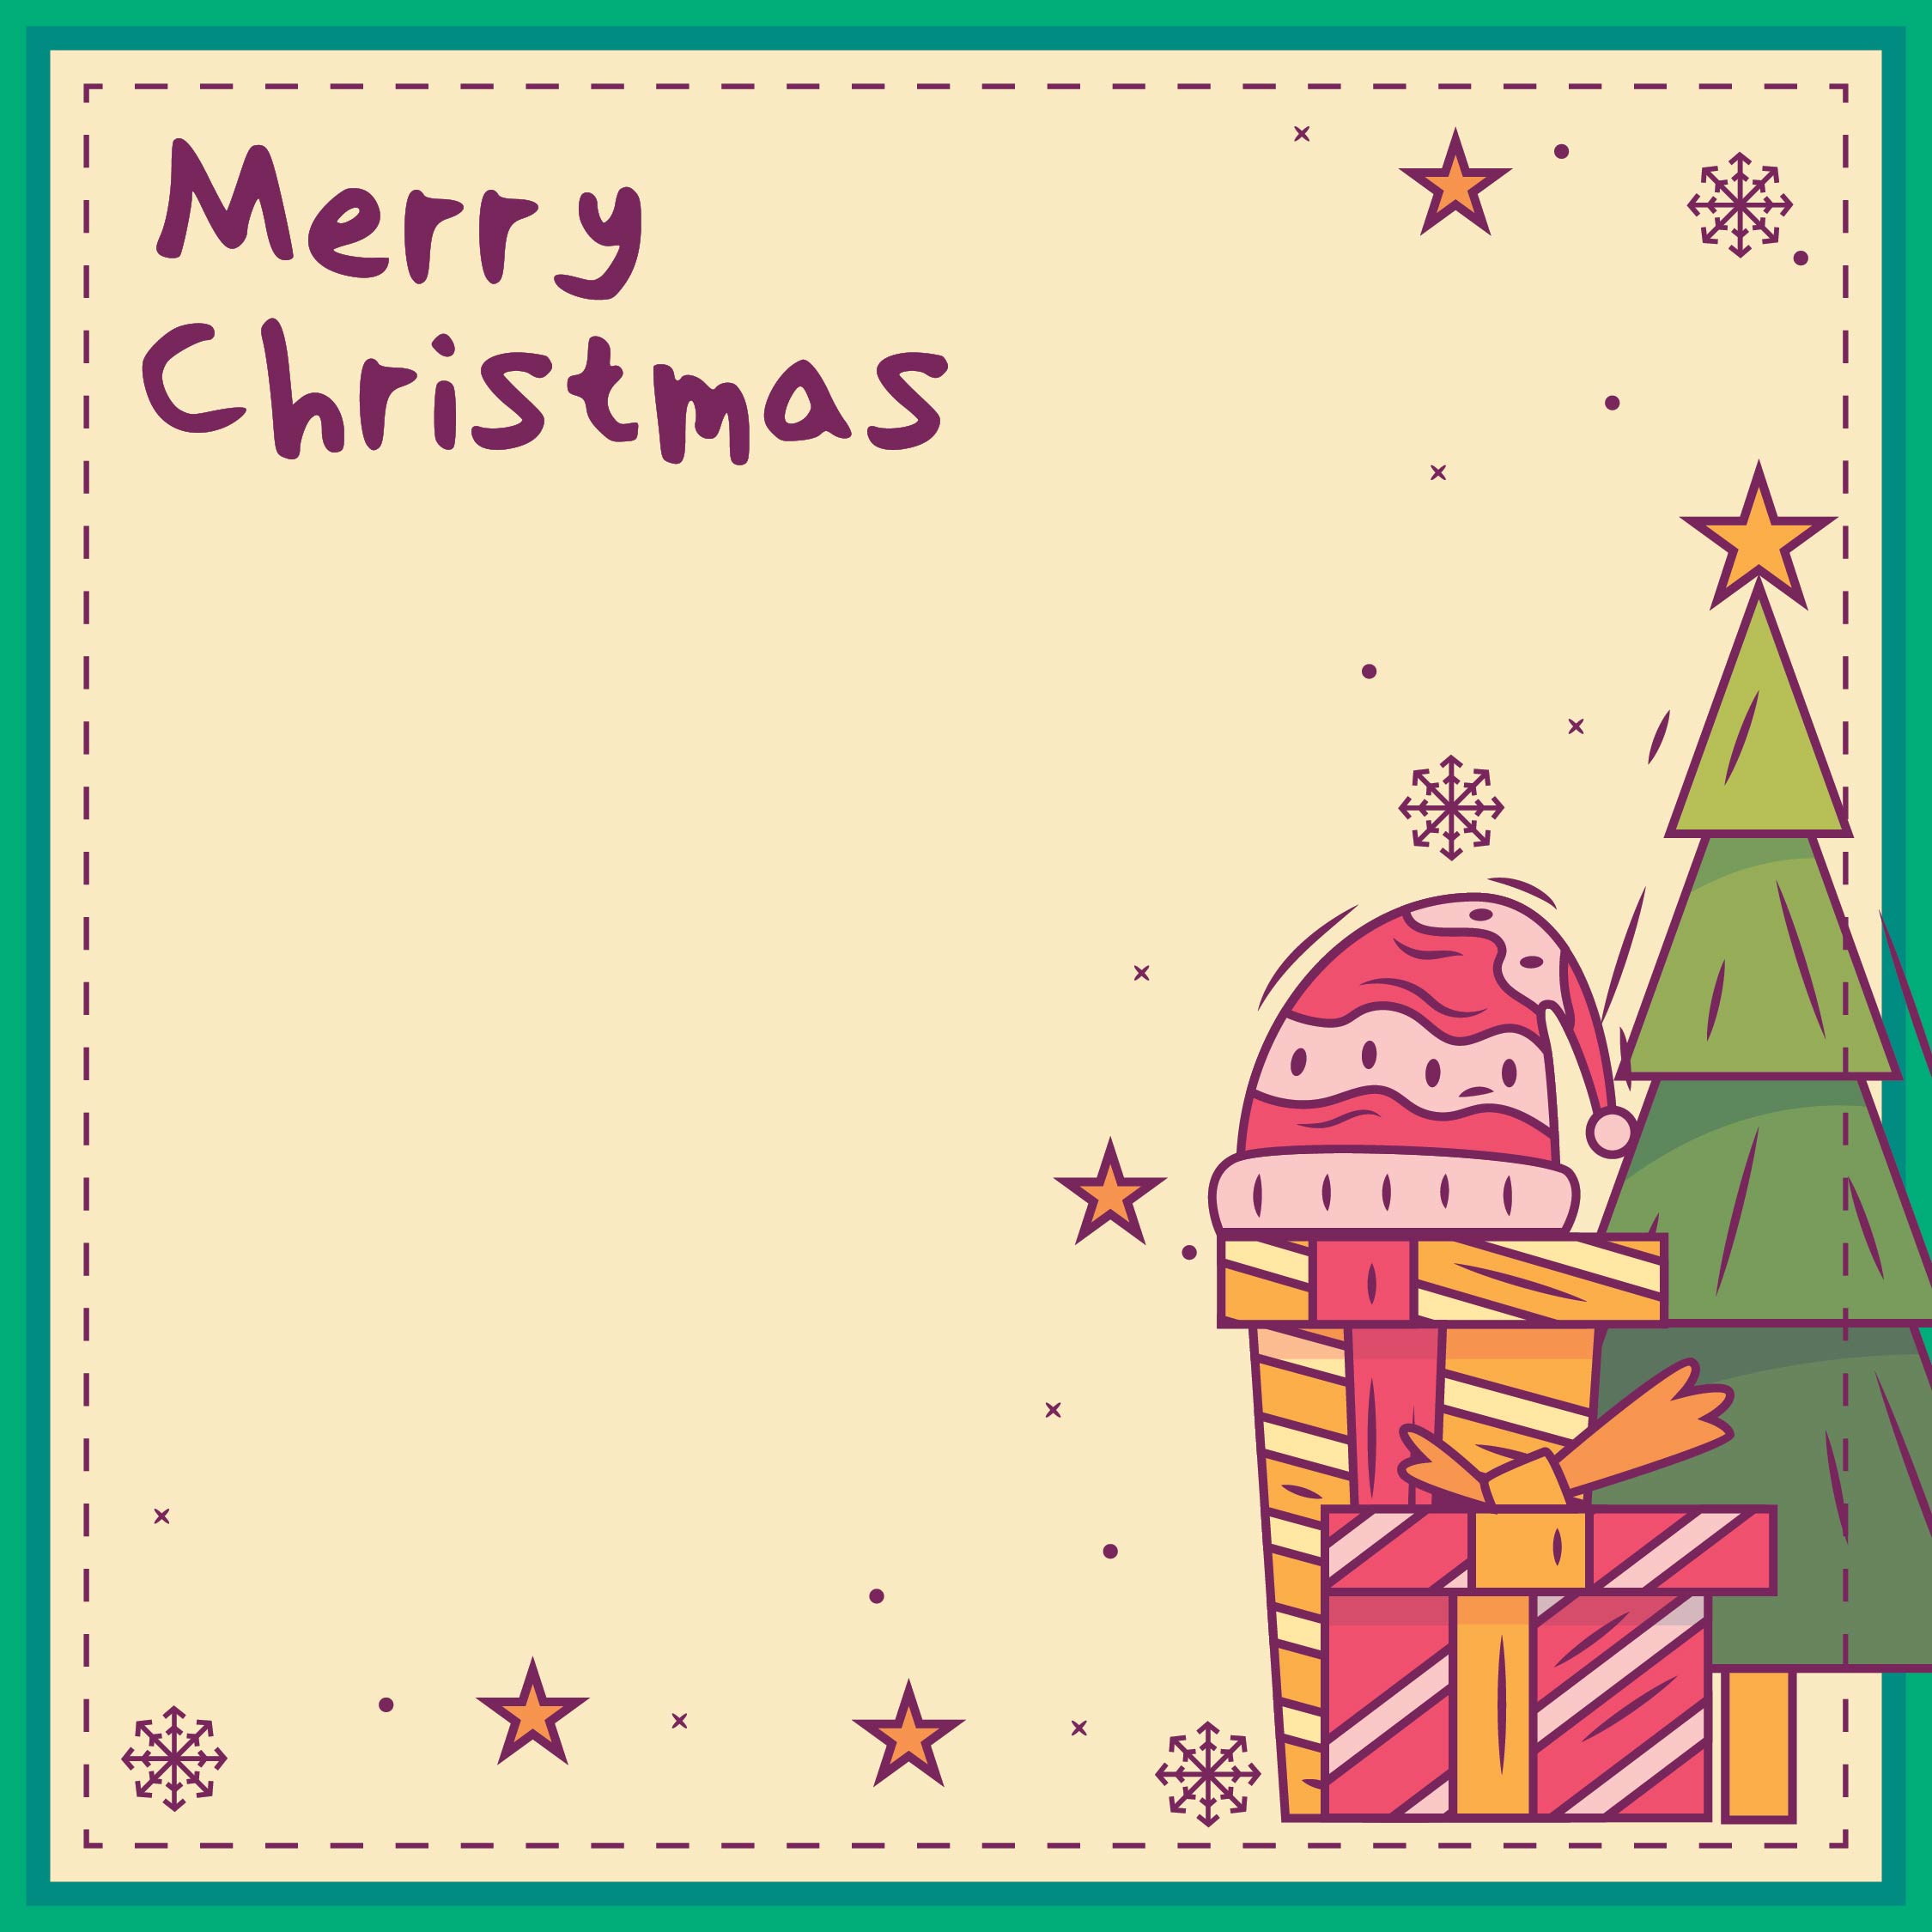 Christmas cards you can print